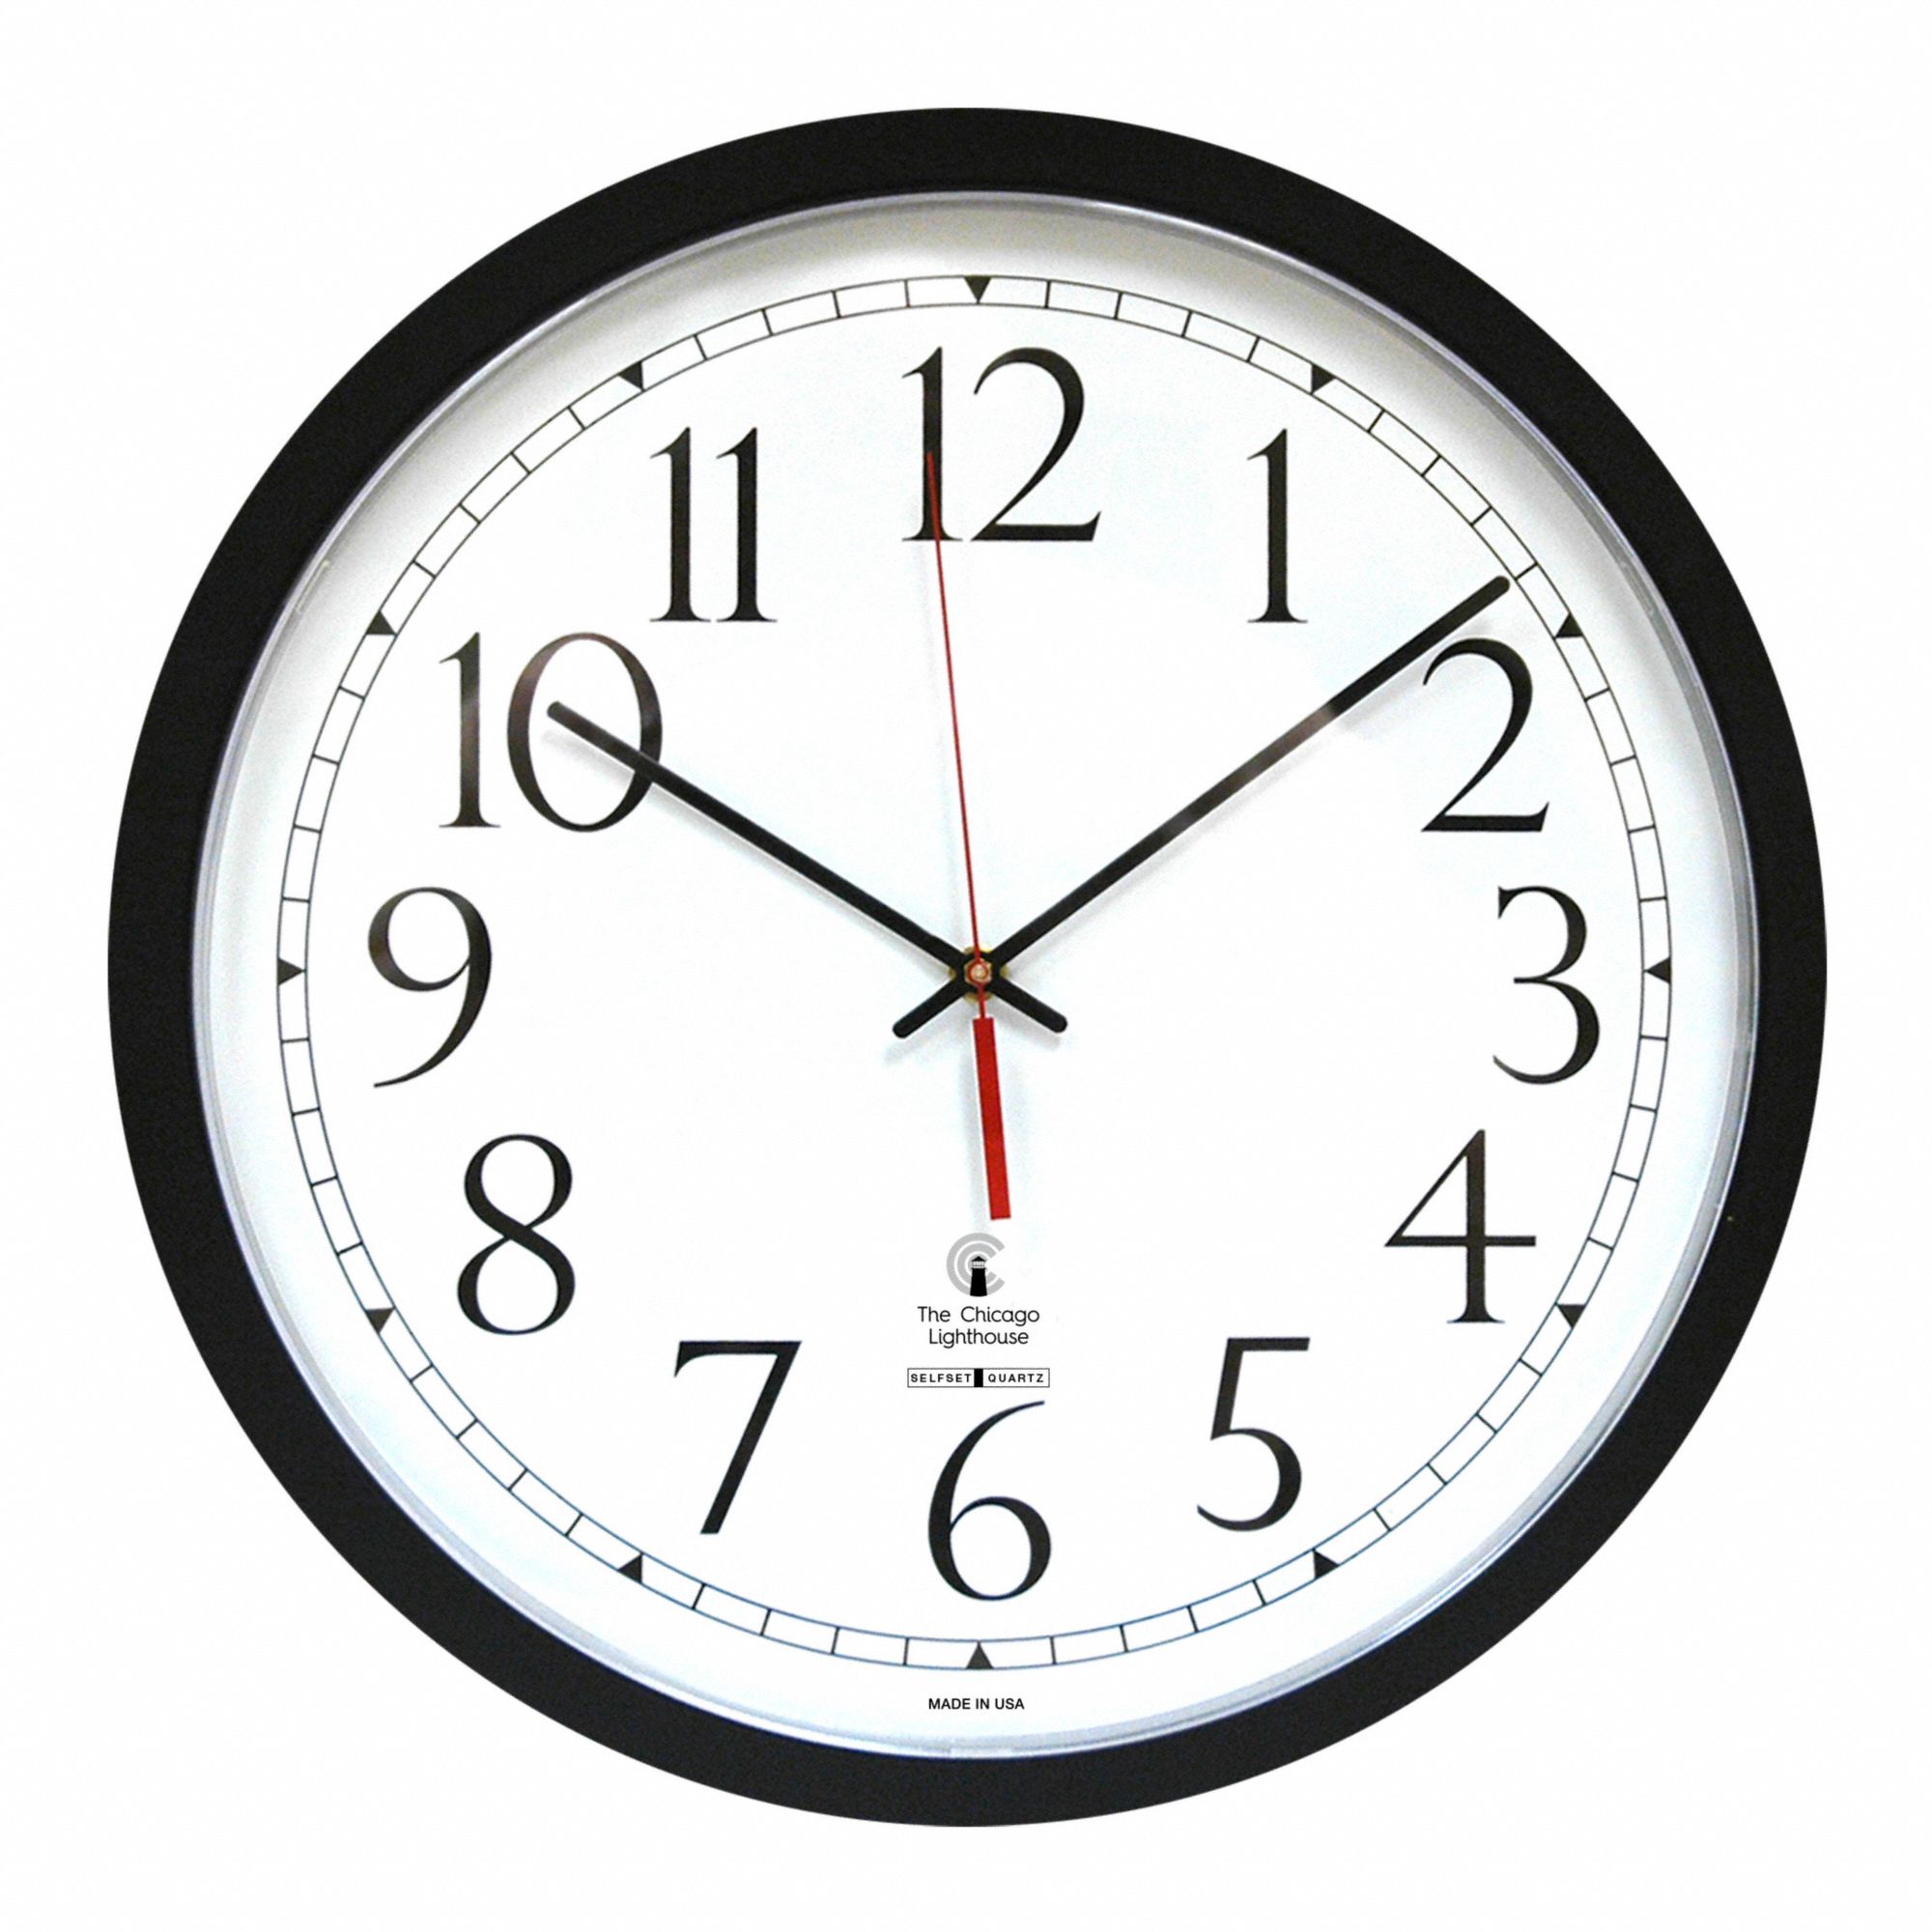 Wall Clock: Memory Chip, Arabic, Round, 16 1/2 in Overall Dia., 14 1/2 in Face Dia., Battery, Analog